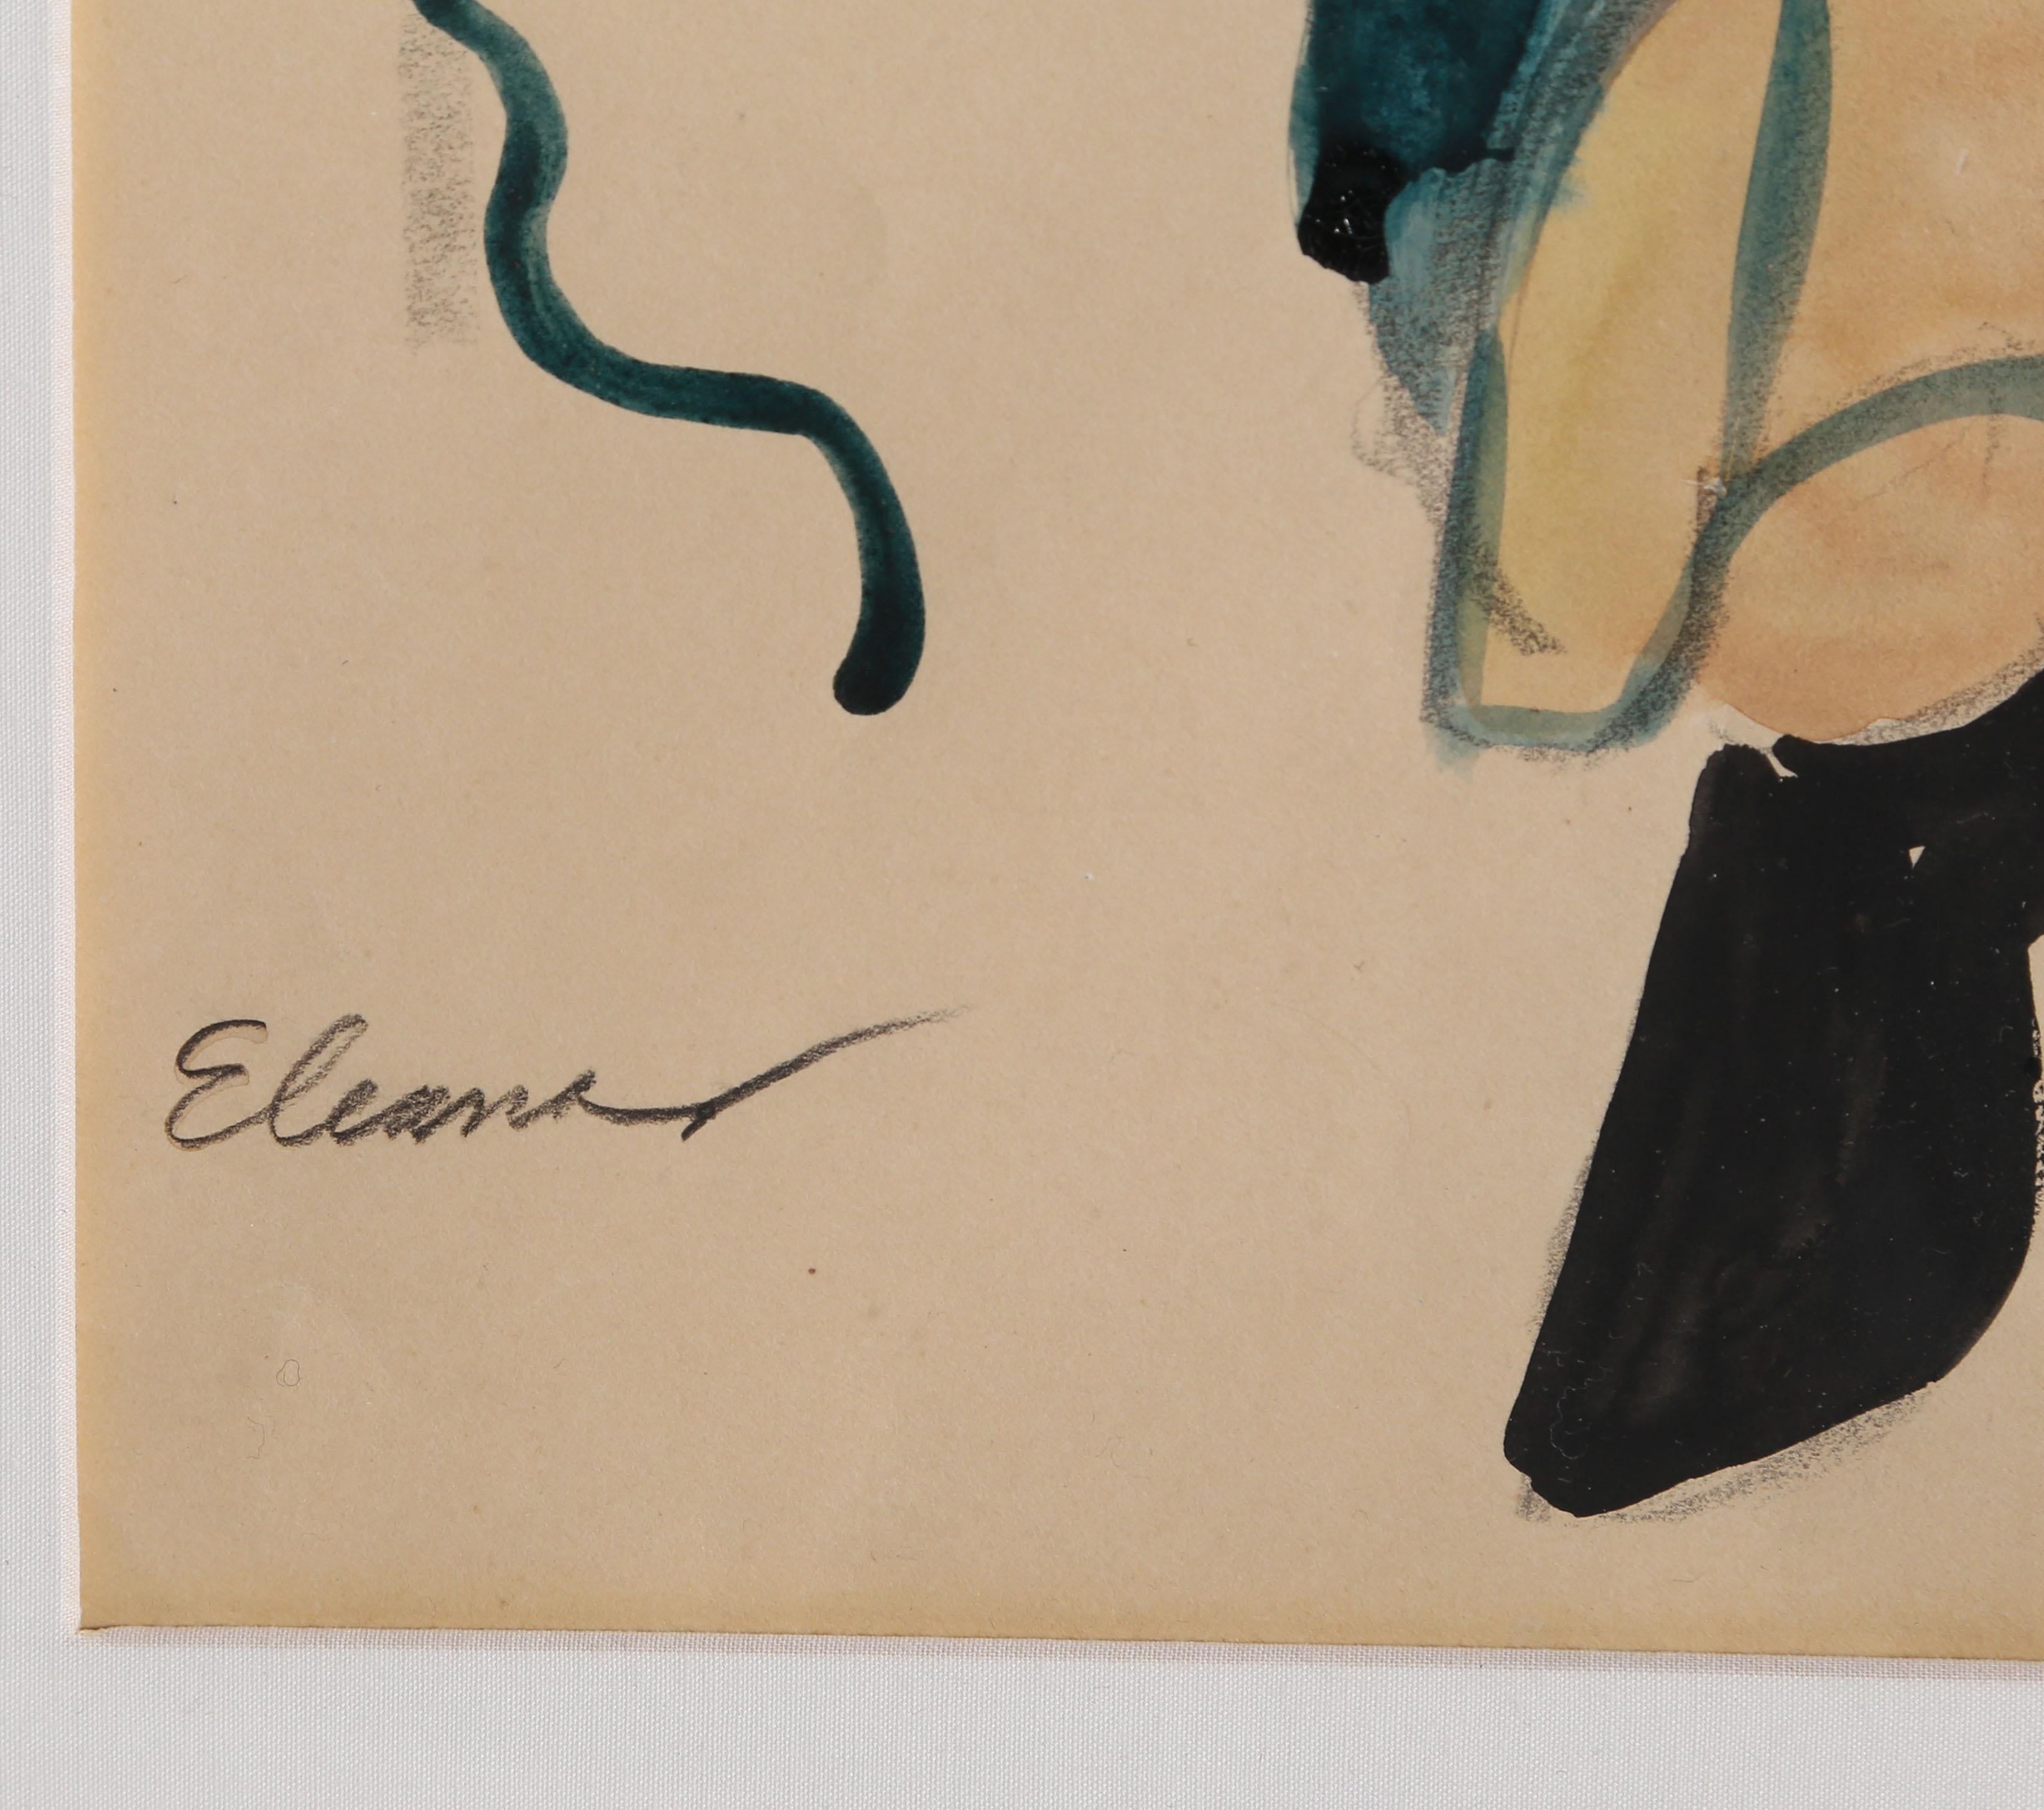 Artist: Emmet Edwards
Title: Eleanor
Medium: Watercolor on paper, signed, dated, and titled in pencil
Image Size: 21 x 14 inches
Frame Size: 28.5 x 21.5 inches